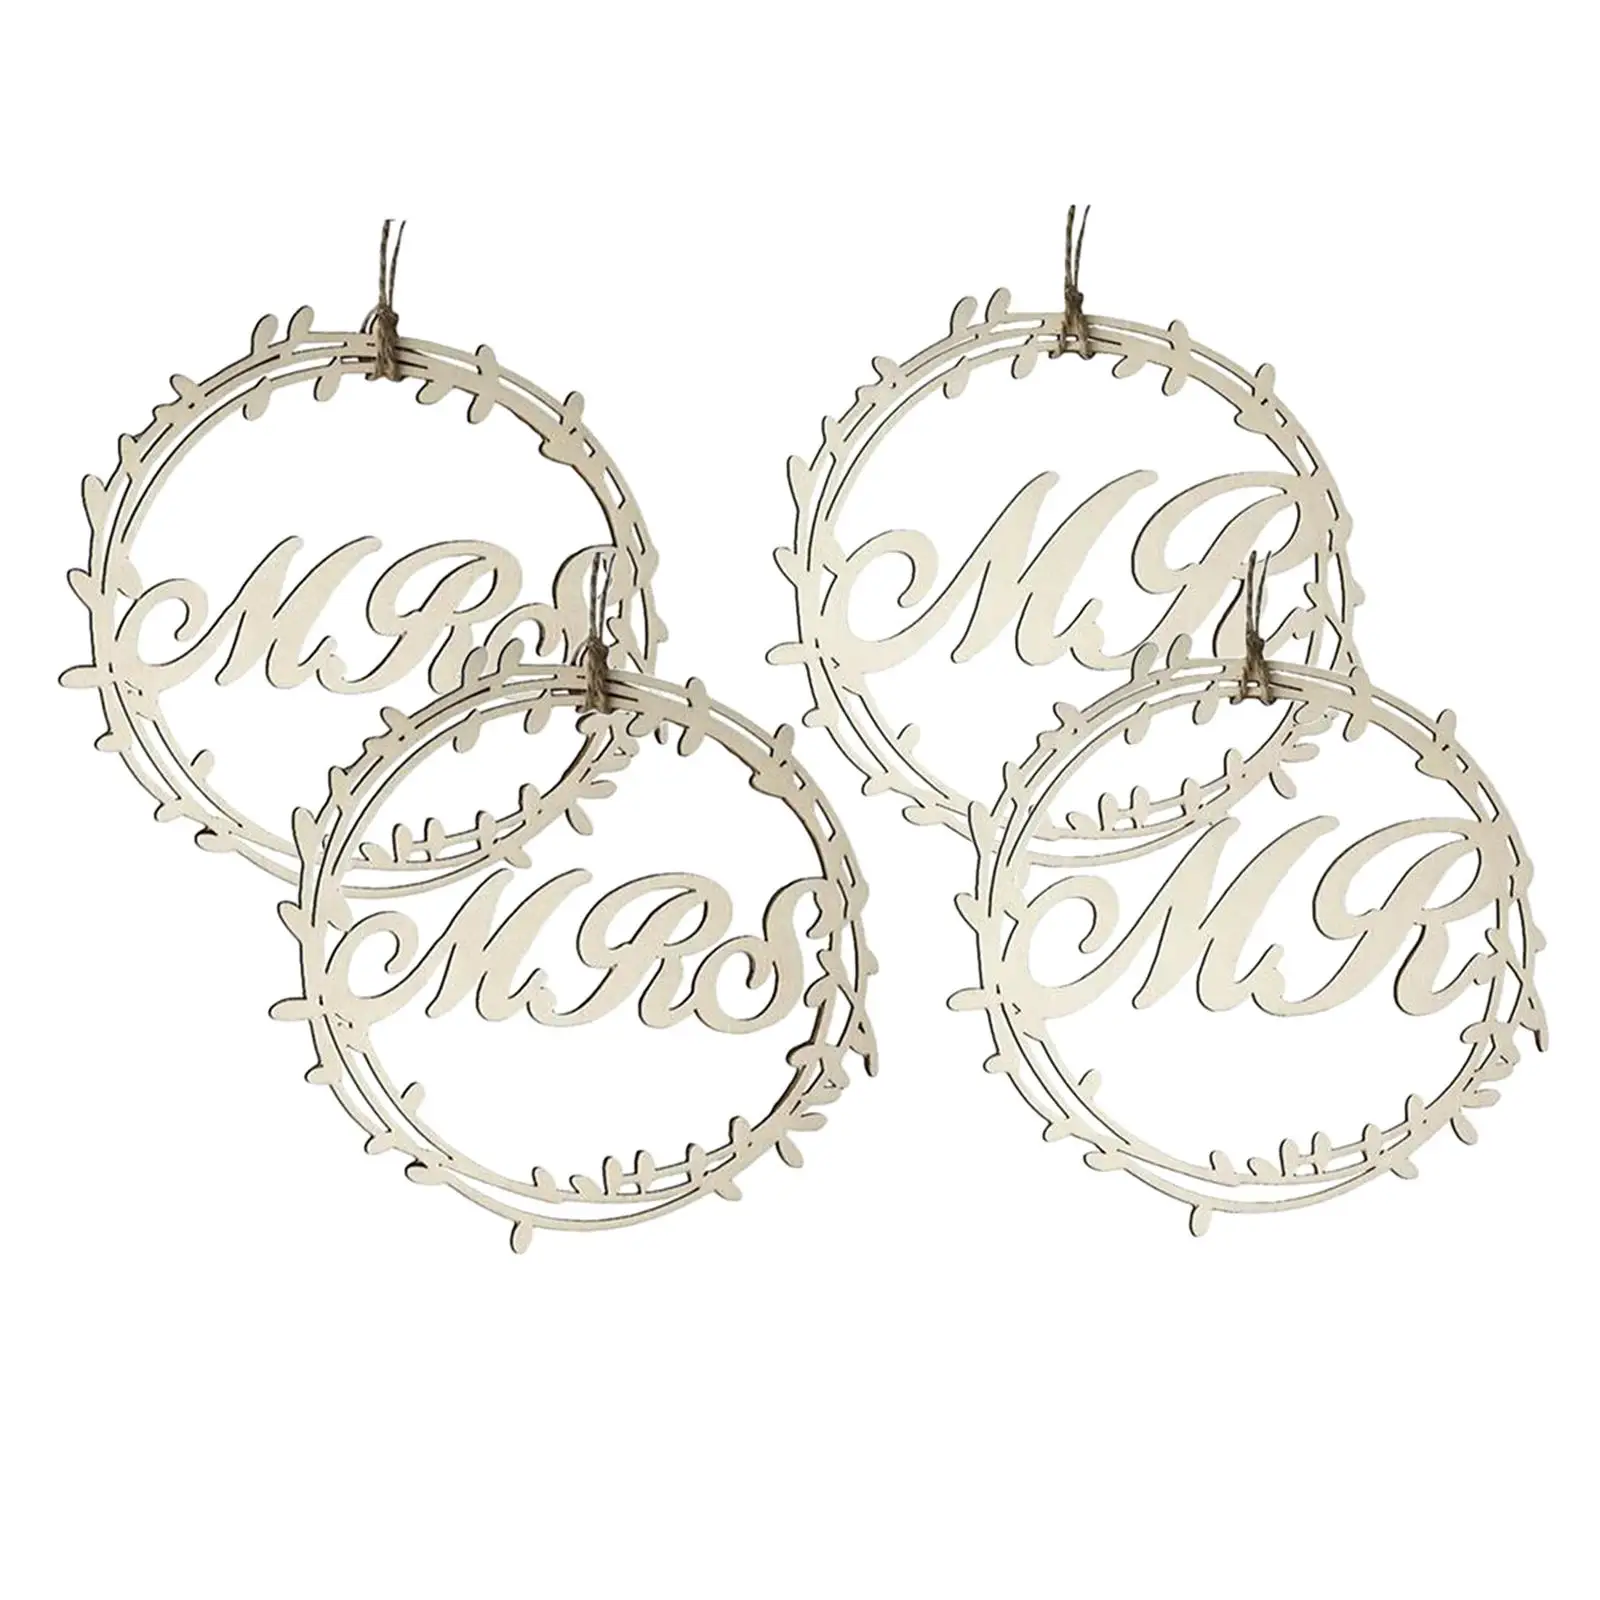 Wedding Decoration Married Couple Circle Shape for Wedding Ceremony Supplies